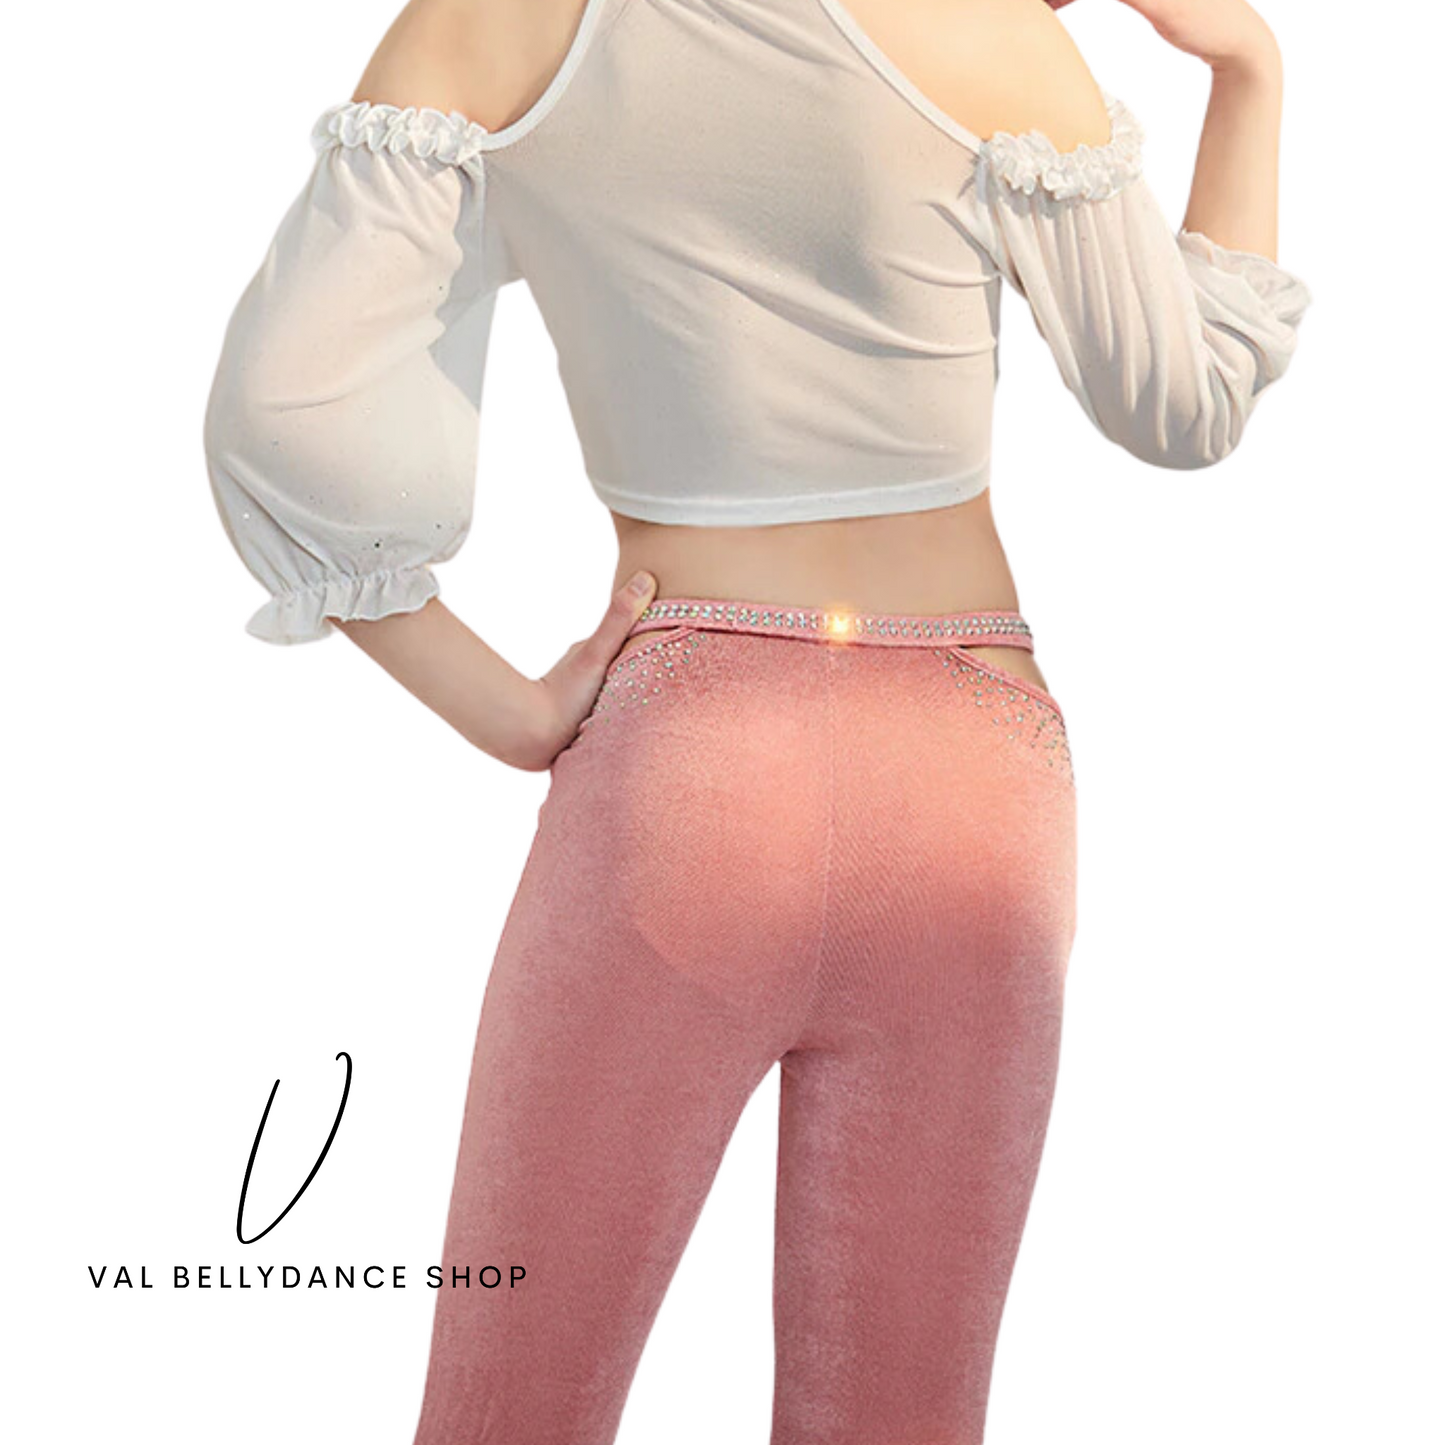 Victoria Mesh and Crytal Bellydance Practice Pants